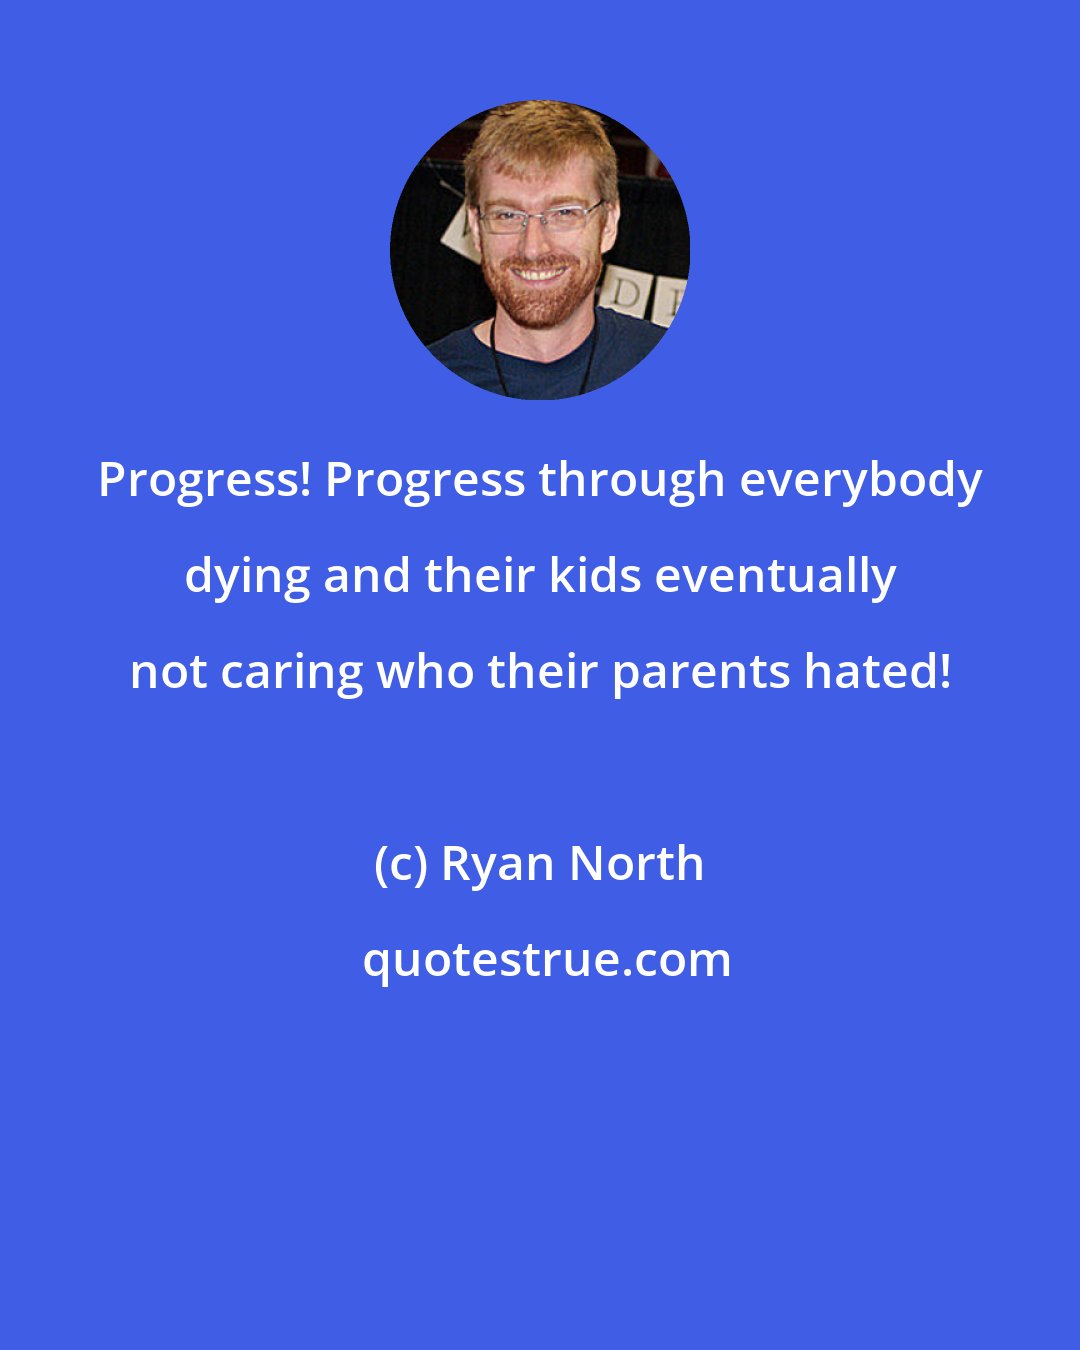 Ryan North: Progress! Progress through everybody dying and their kids eventually not caring who their parents hated!